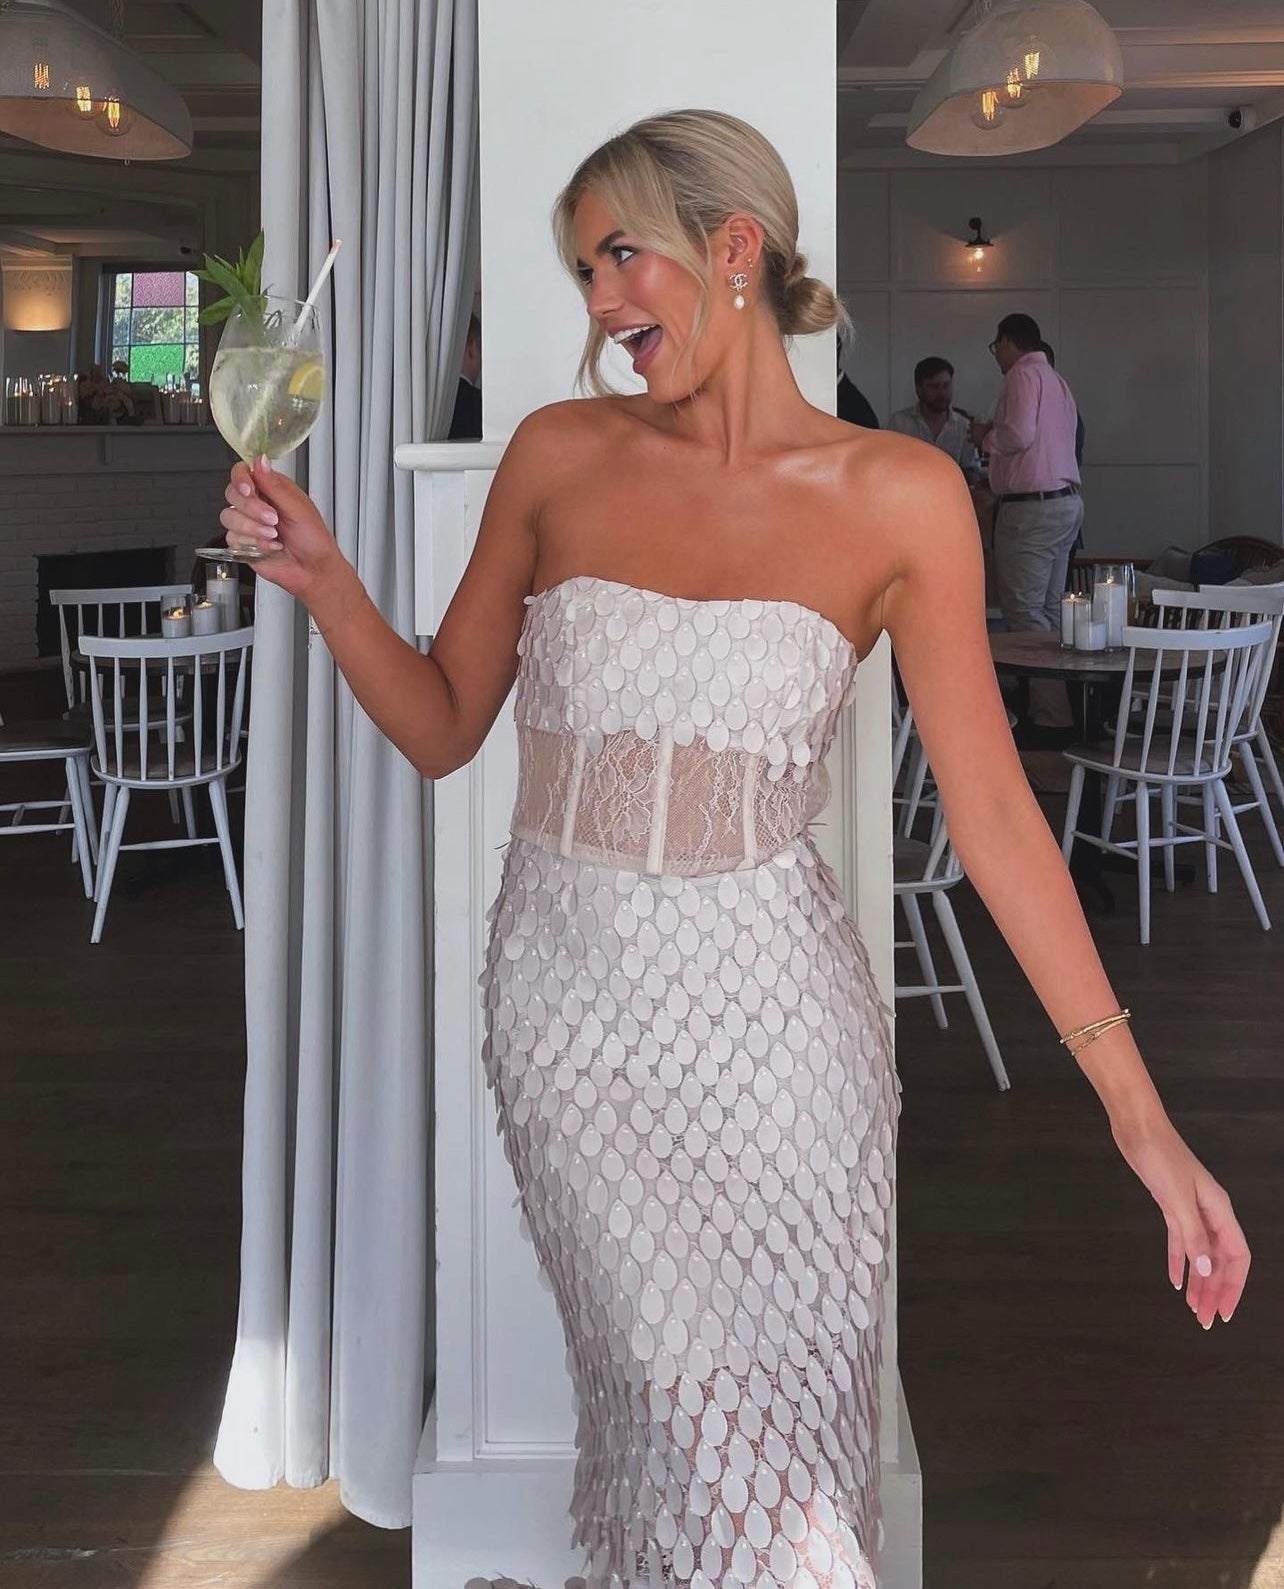 Dress Hire, Dress Hire near me, Dress Hire Brisbane, The Volte, All The Dresses, Dress Hire Sydney, Dress Hire Adelaide, Dress Hire Perth, Designer Dress, Black Dress, Pink Dress, Red Dress, White Dress, Formal Dress Hire, Wedding Guest Dresses, Birthday Dress Hire